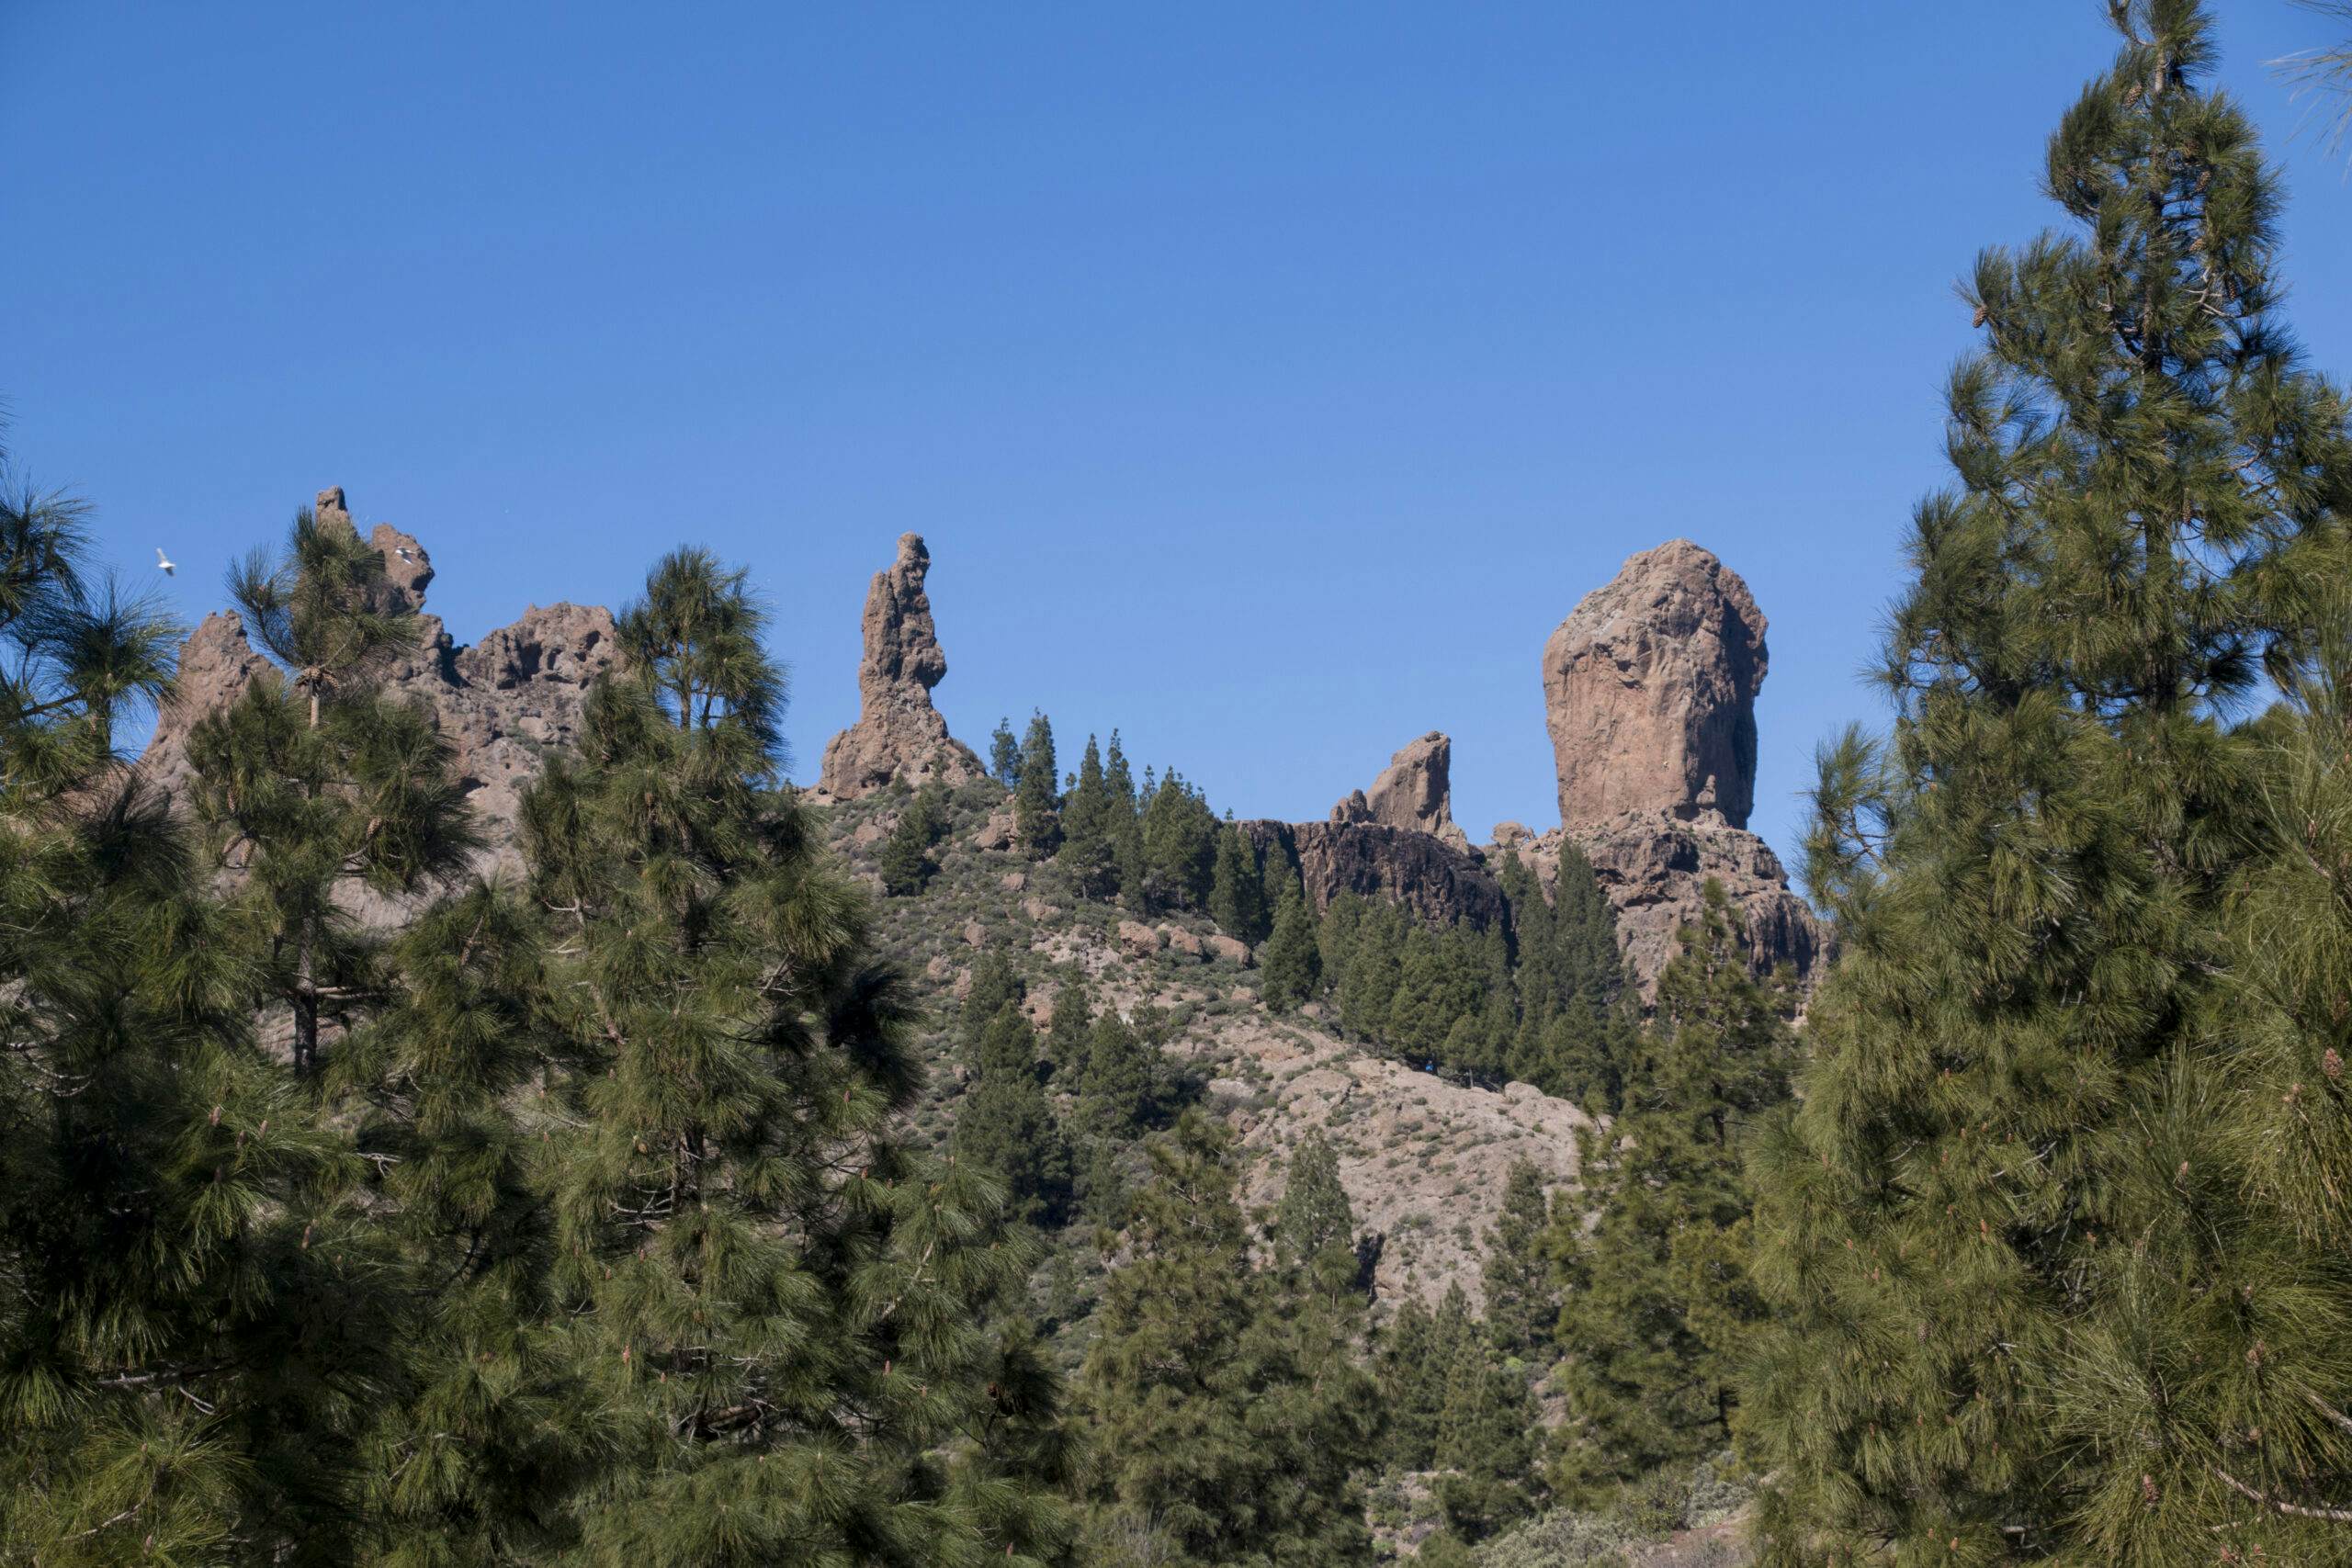 Rock formations next to the Roque Nublo